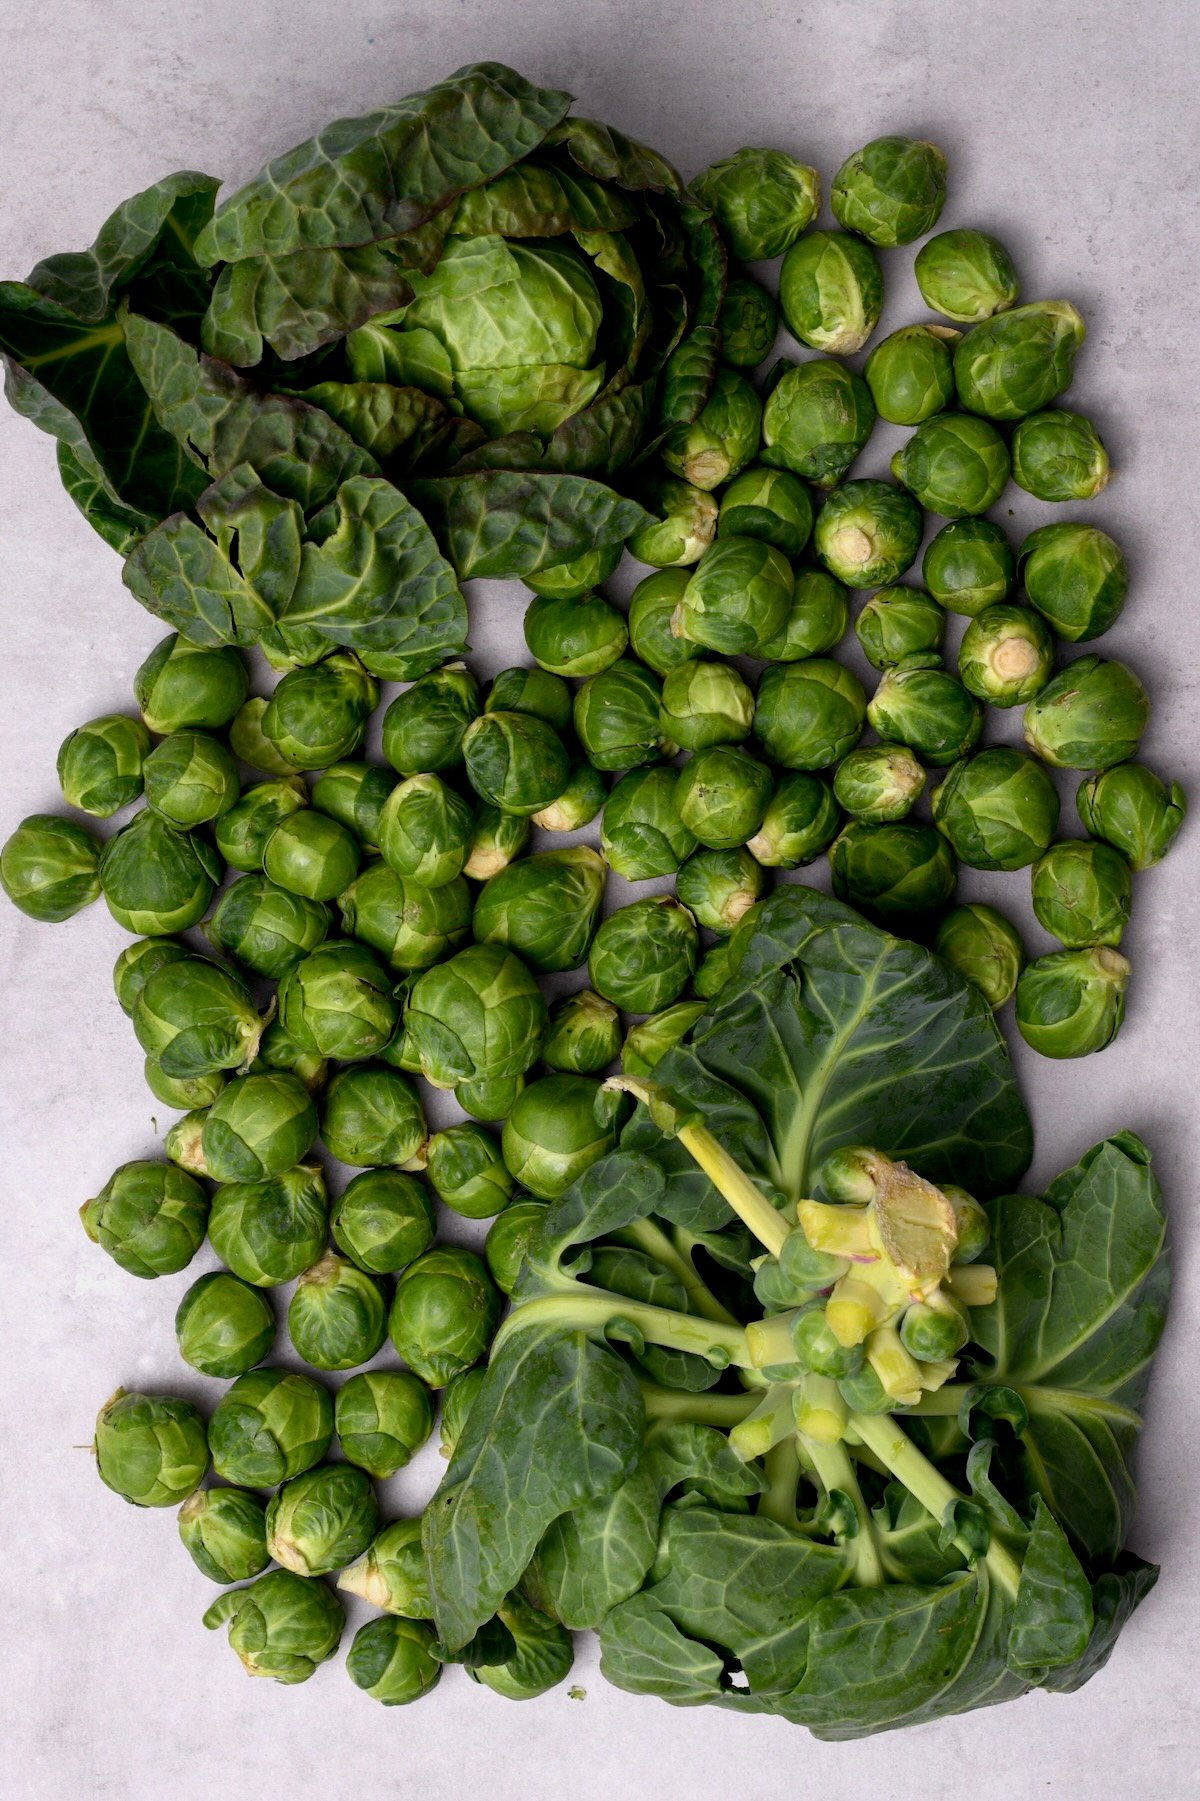 Fresh brussel sprouts on a flat surface